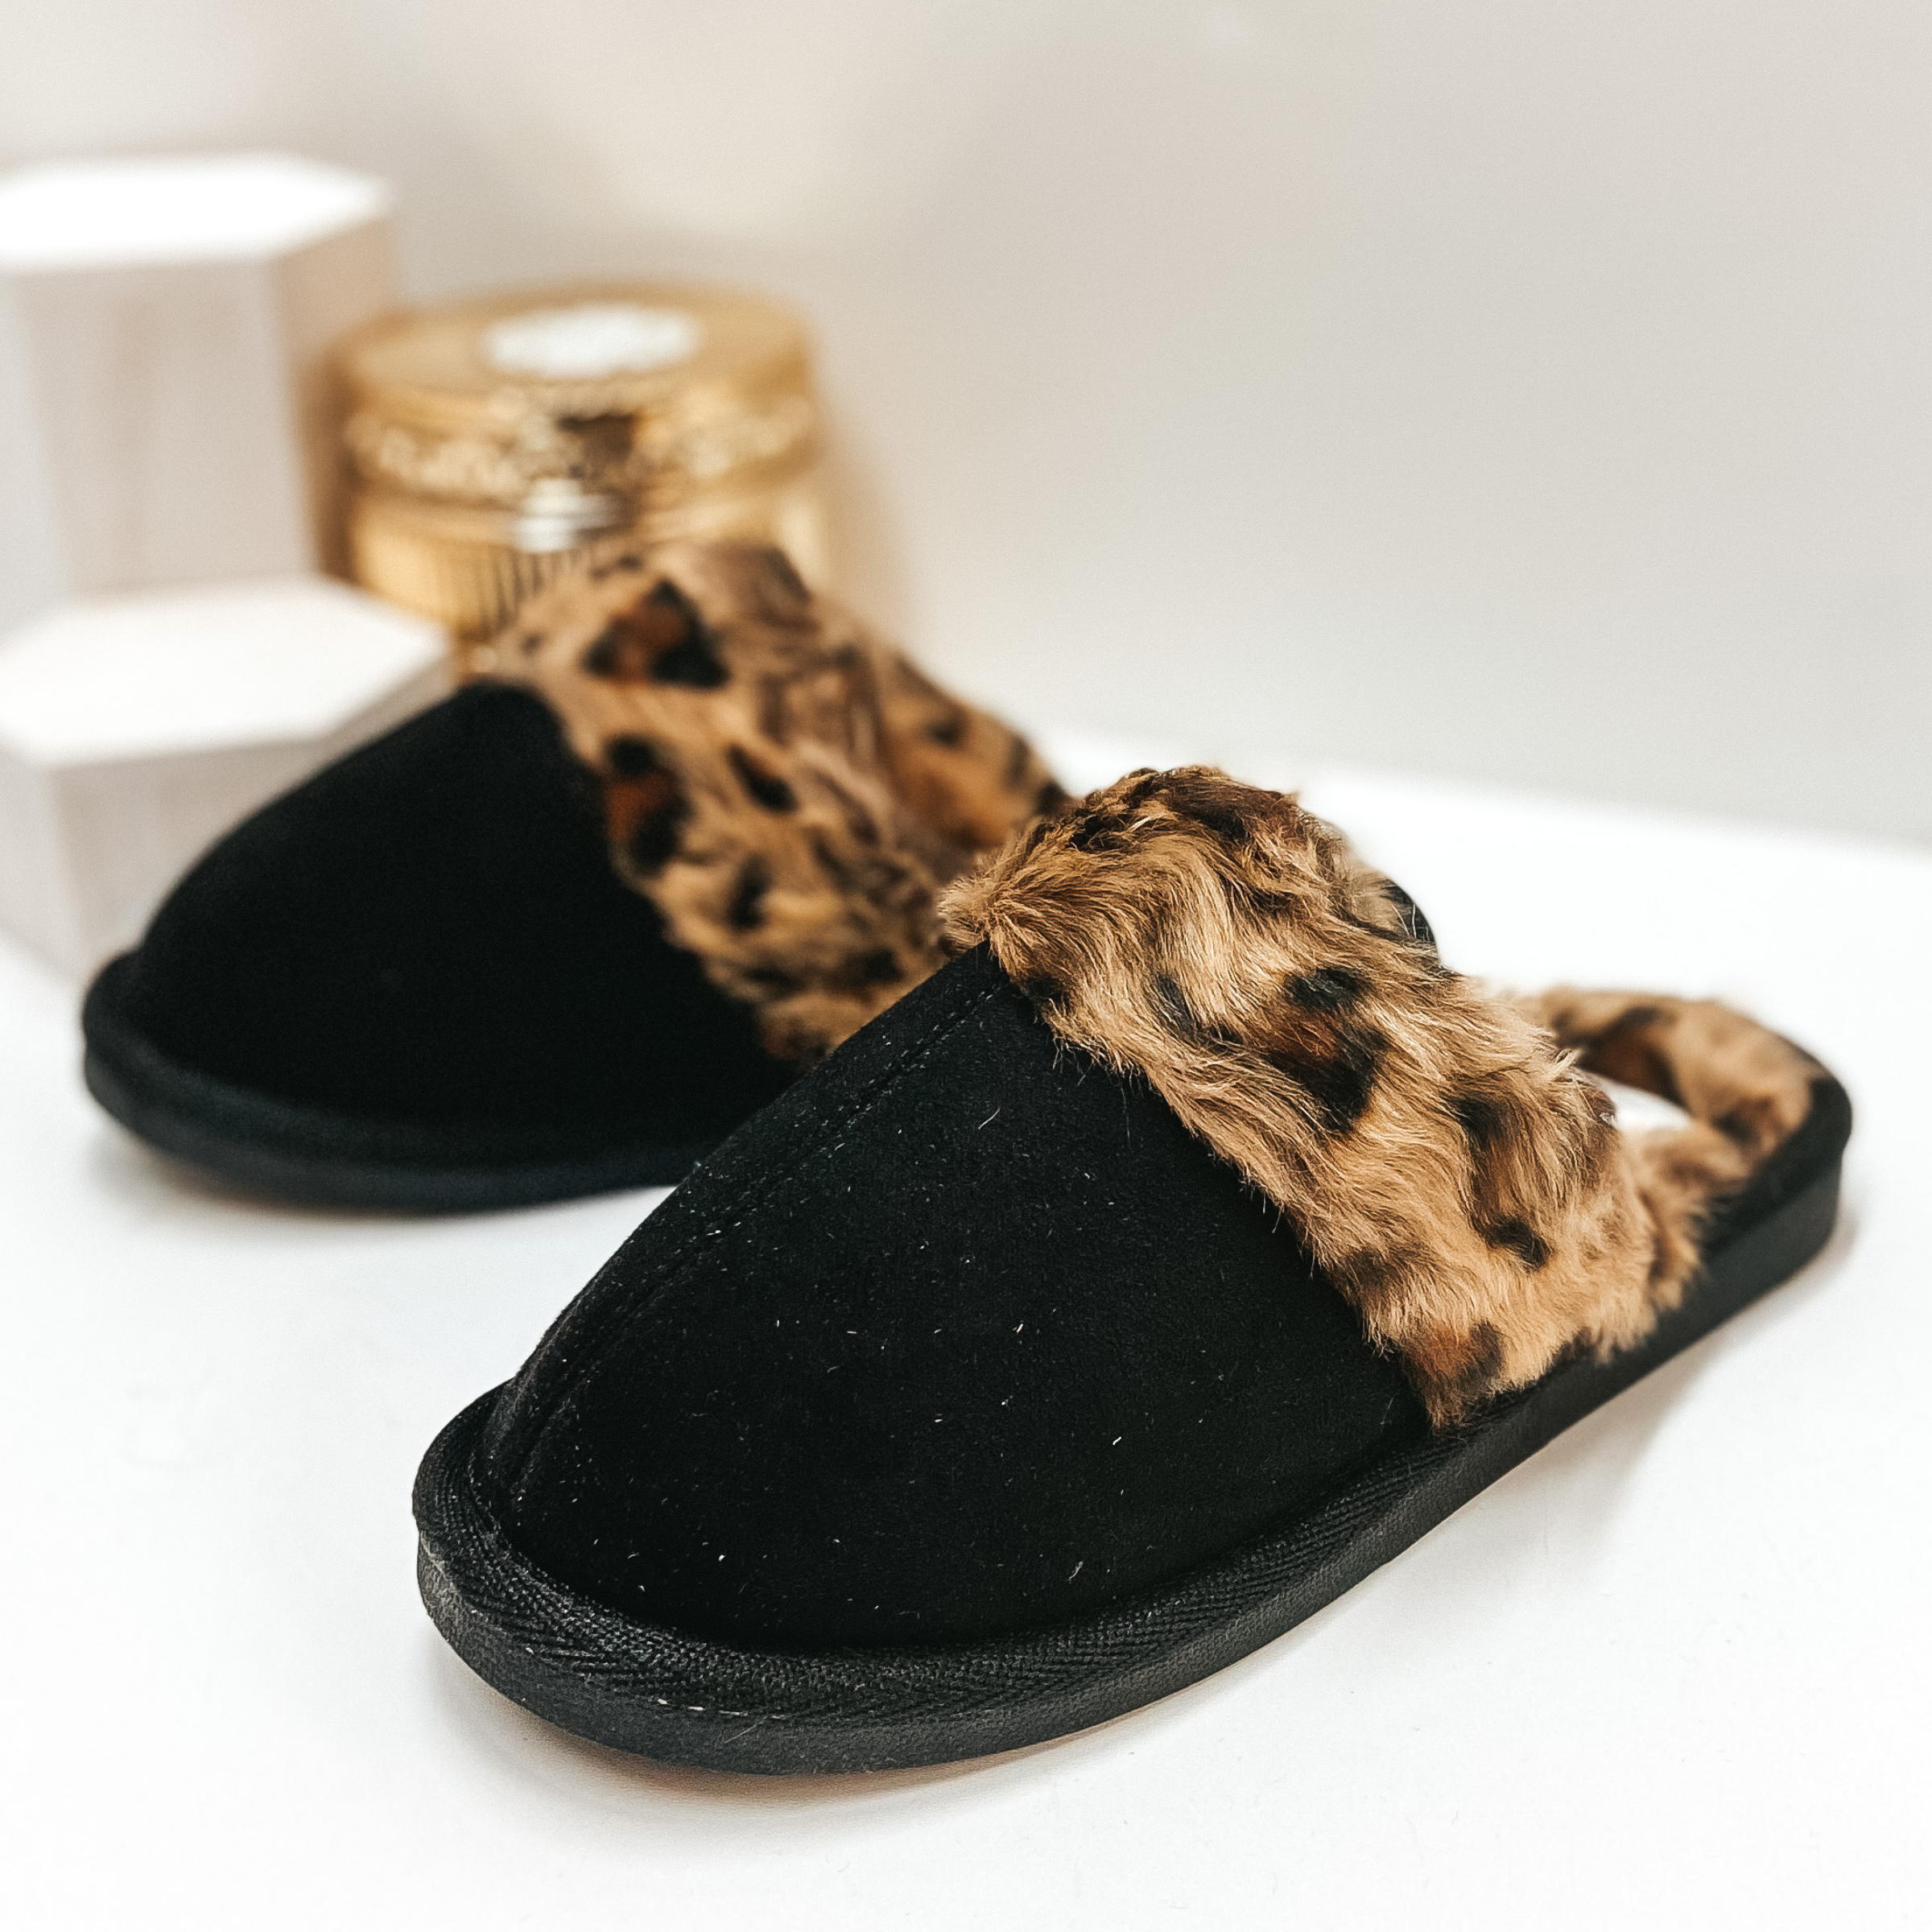 Black house slippers with leopard furry lining. Pictured on white background.